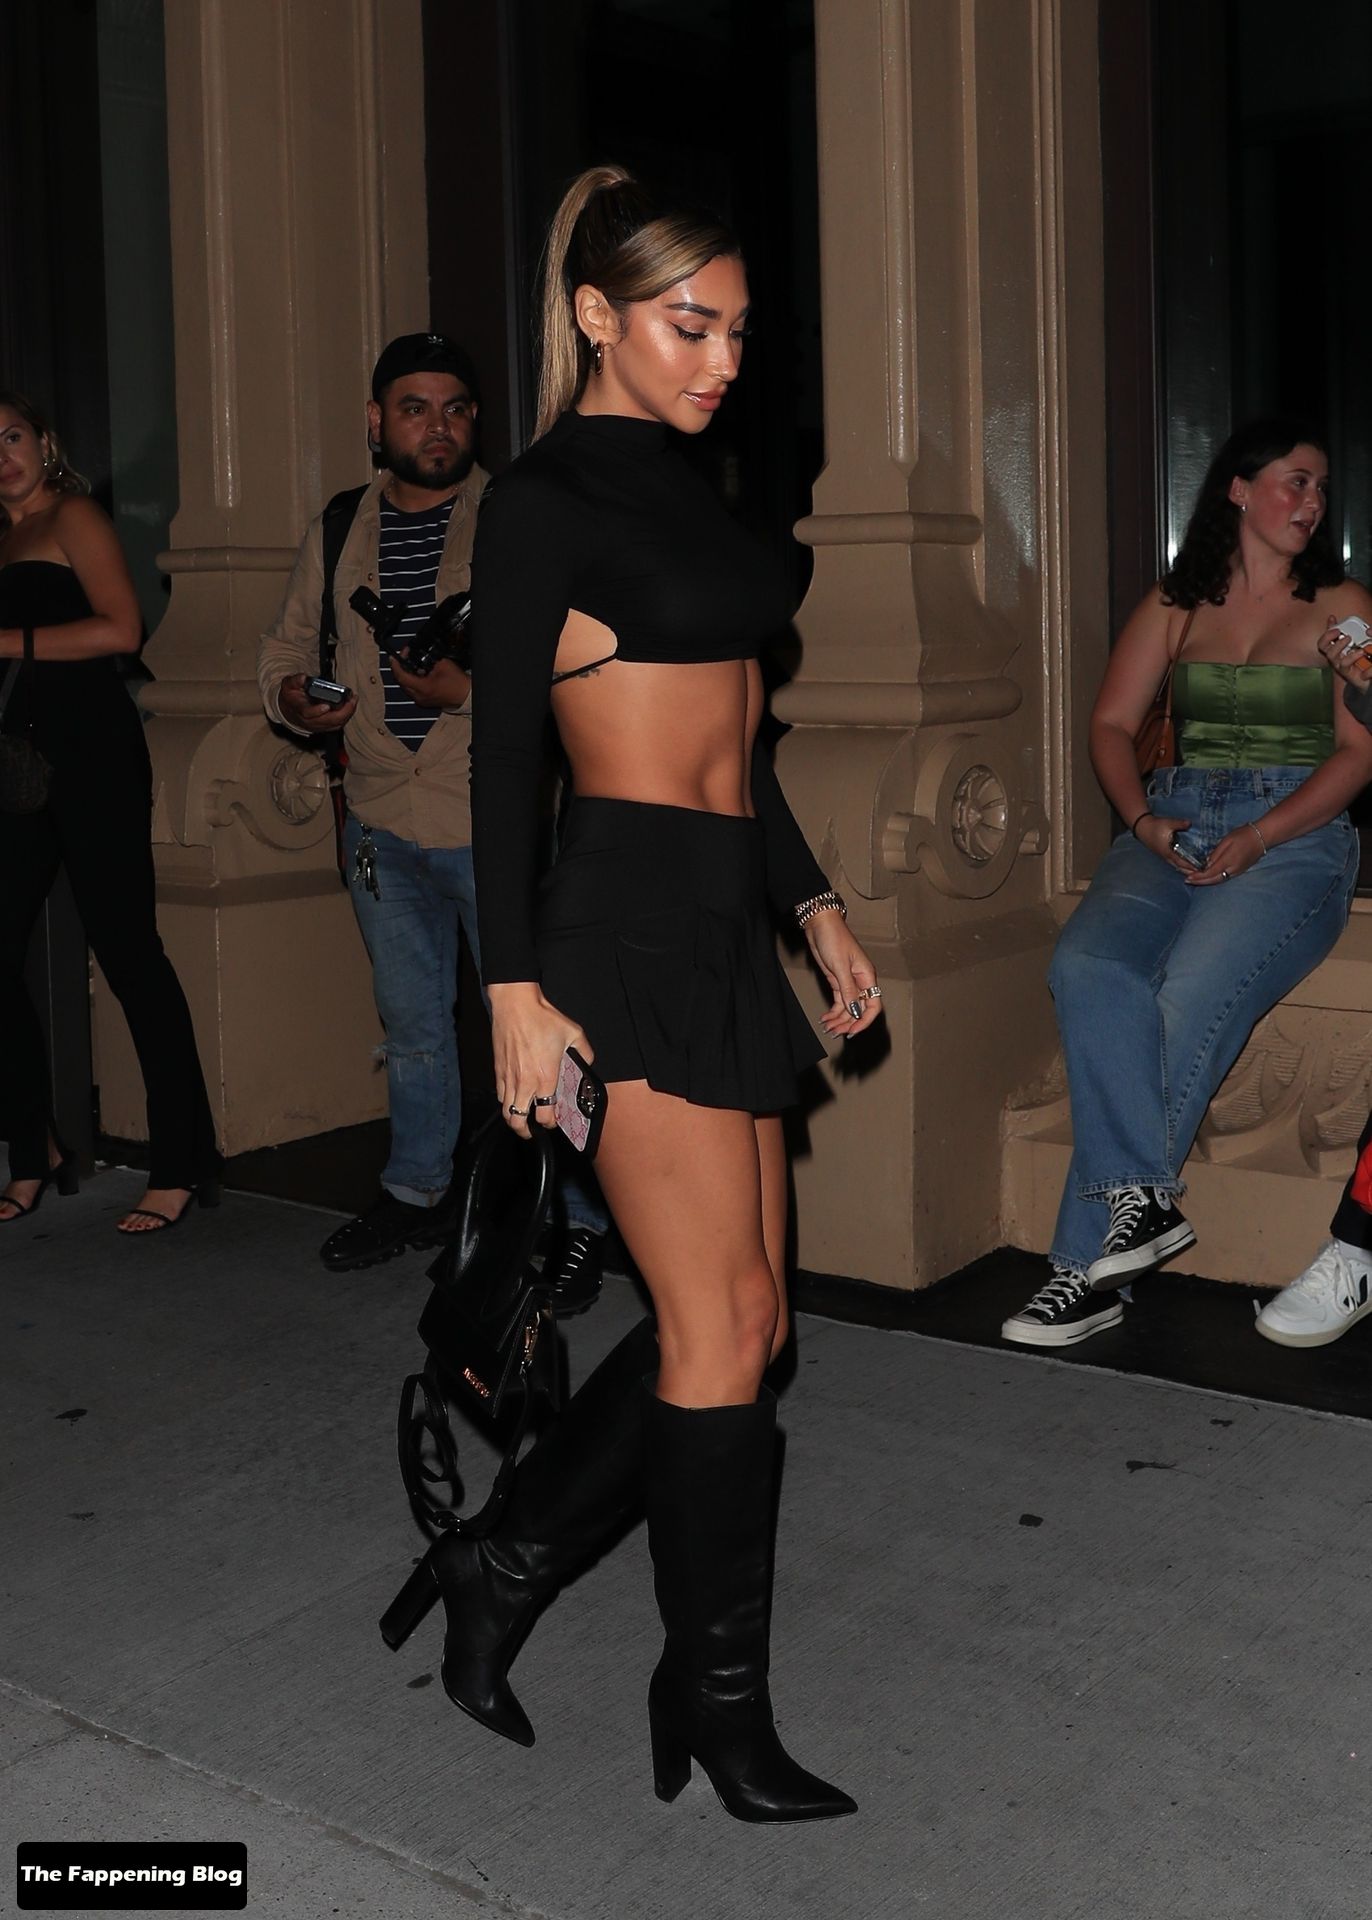 Chantel Jeffries See Through Nudity The Fappening Blog 3 - Chantel Jeffries Looks Stunning Without a Bra Leaving Fai Khadra’s Birthday Party in NYC (33 Photos)